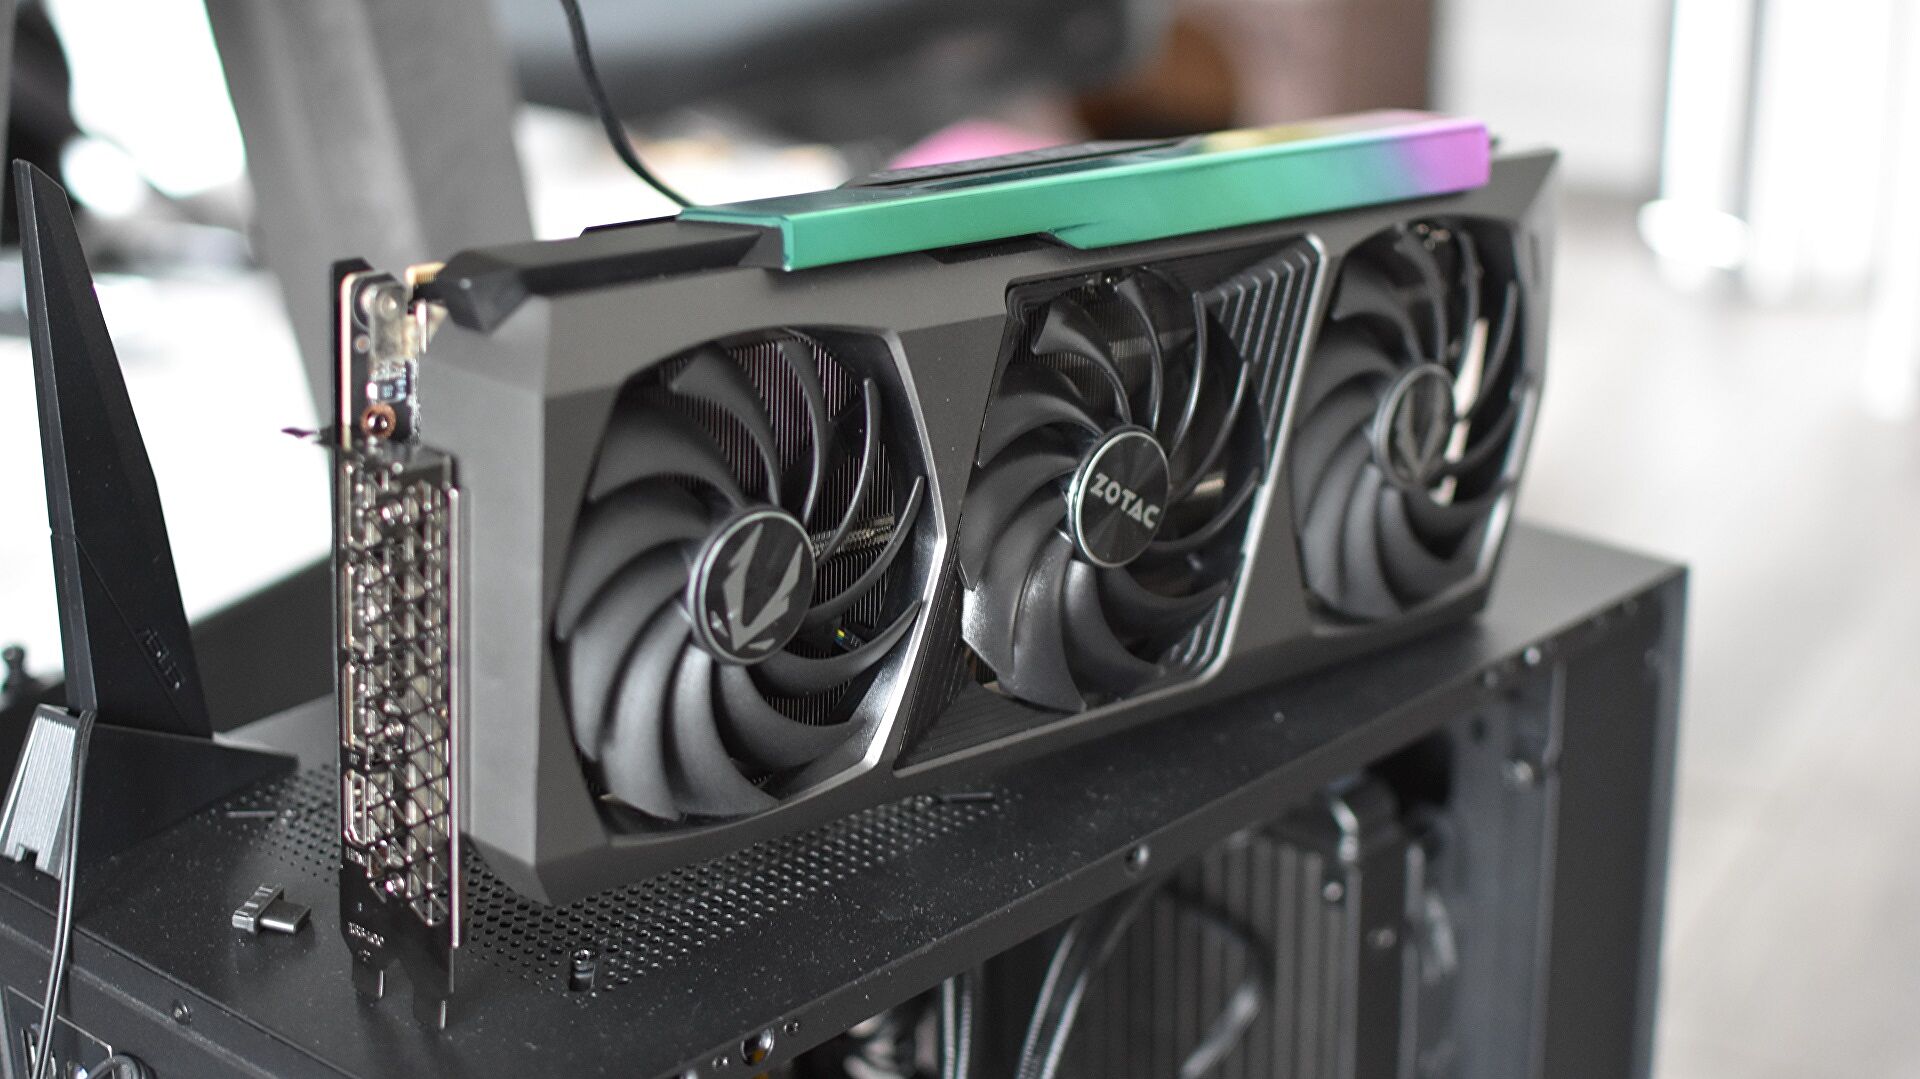 This RTX 3090 Ti is under £1200, some £691 below its UK RRP